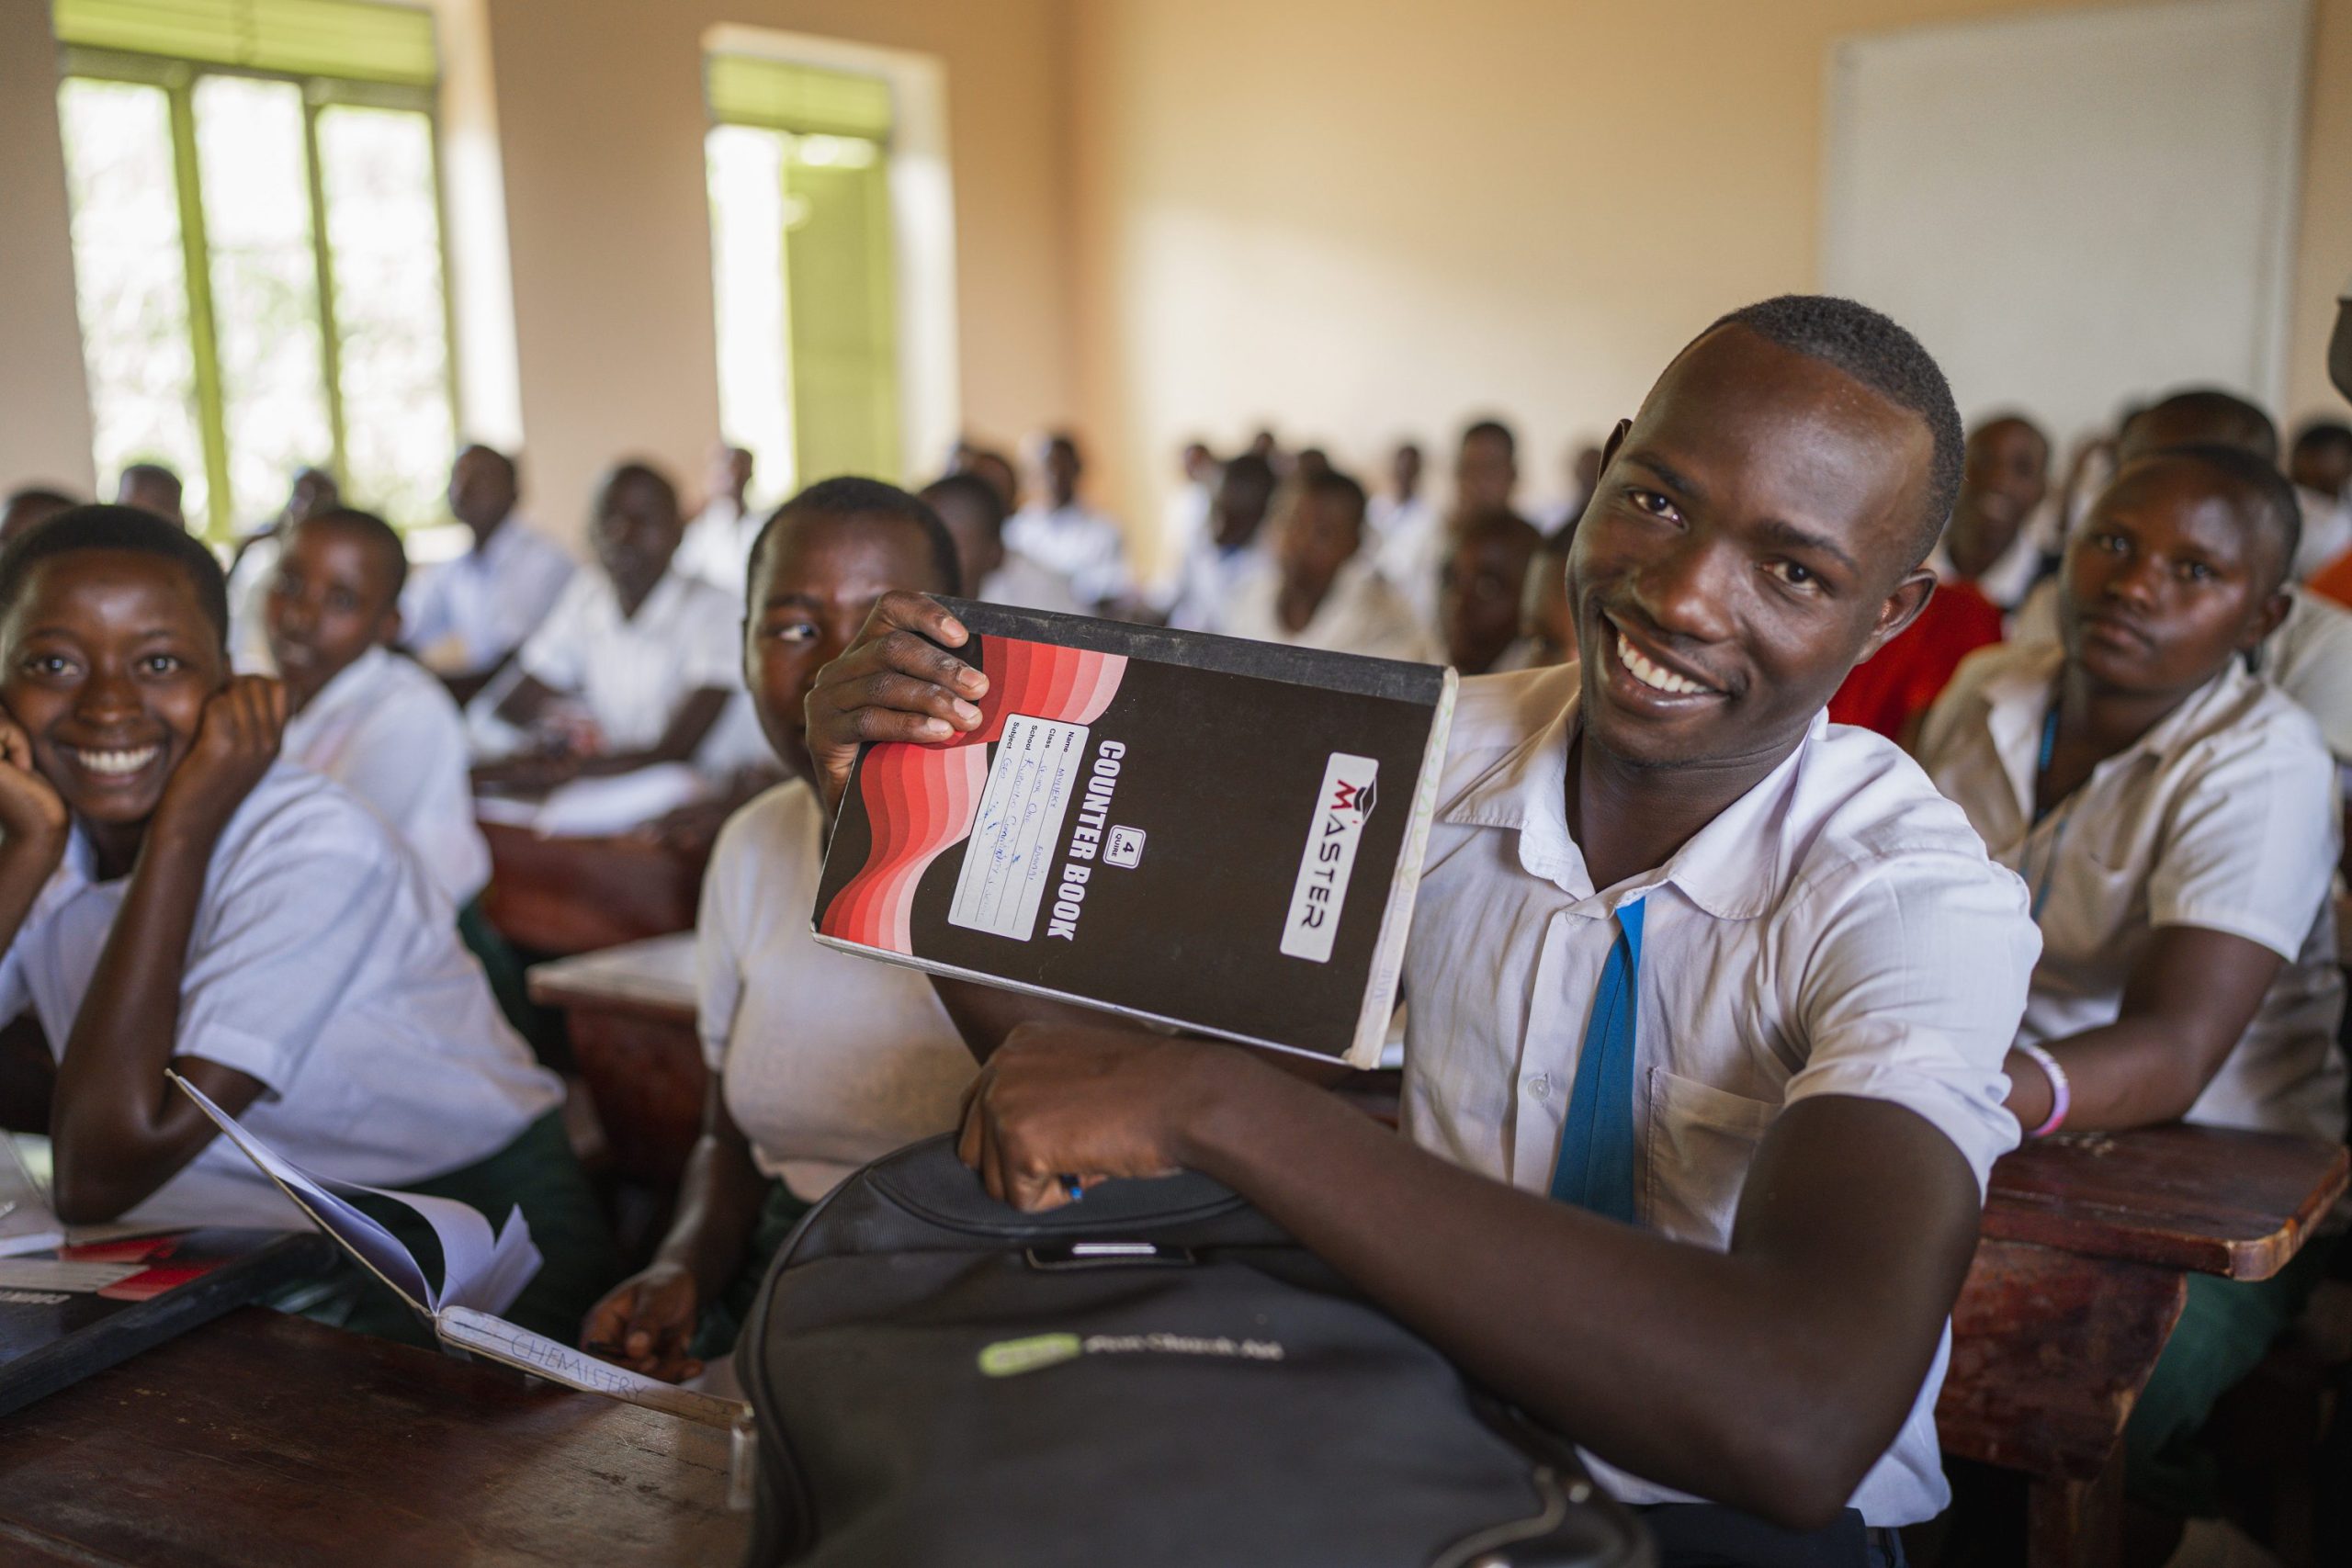 A teenaged boy in school uniform sits at a desk in a full classroom and holds up a text book to the camera. He is smiling.